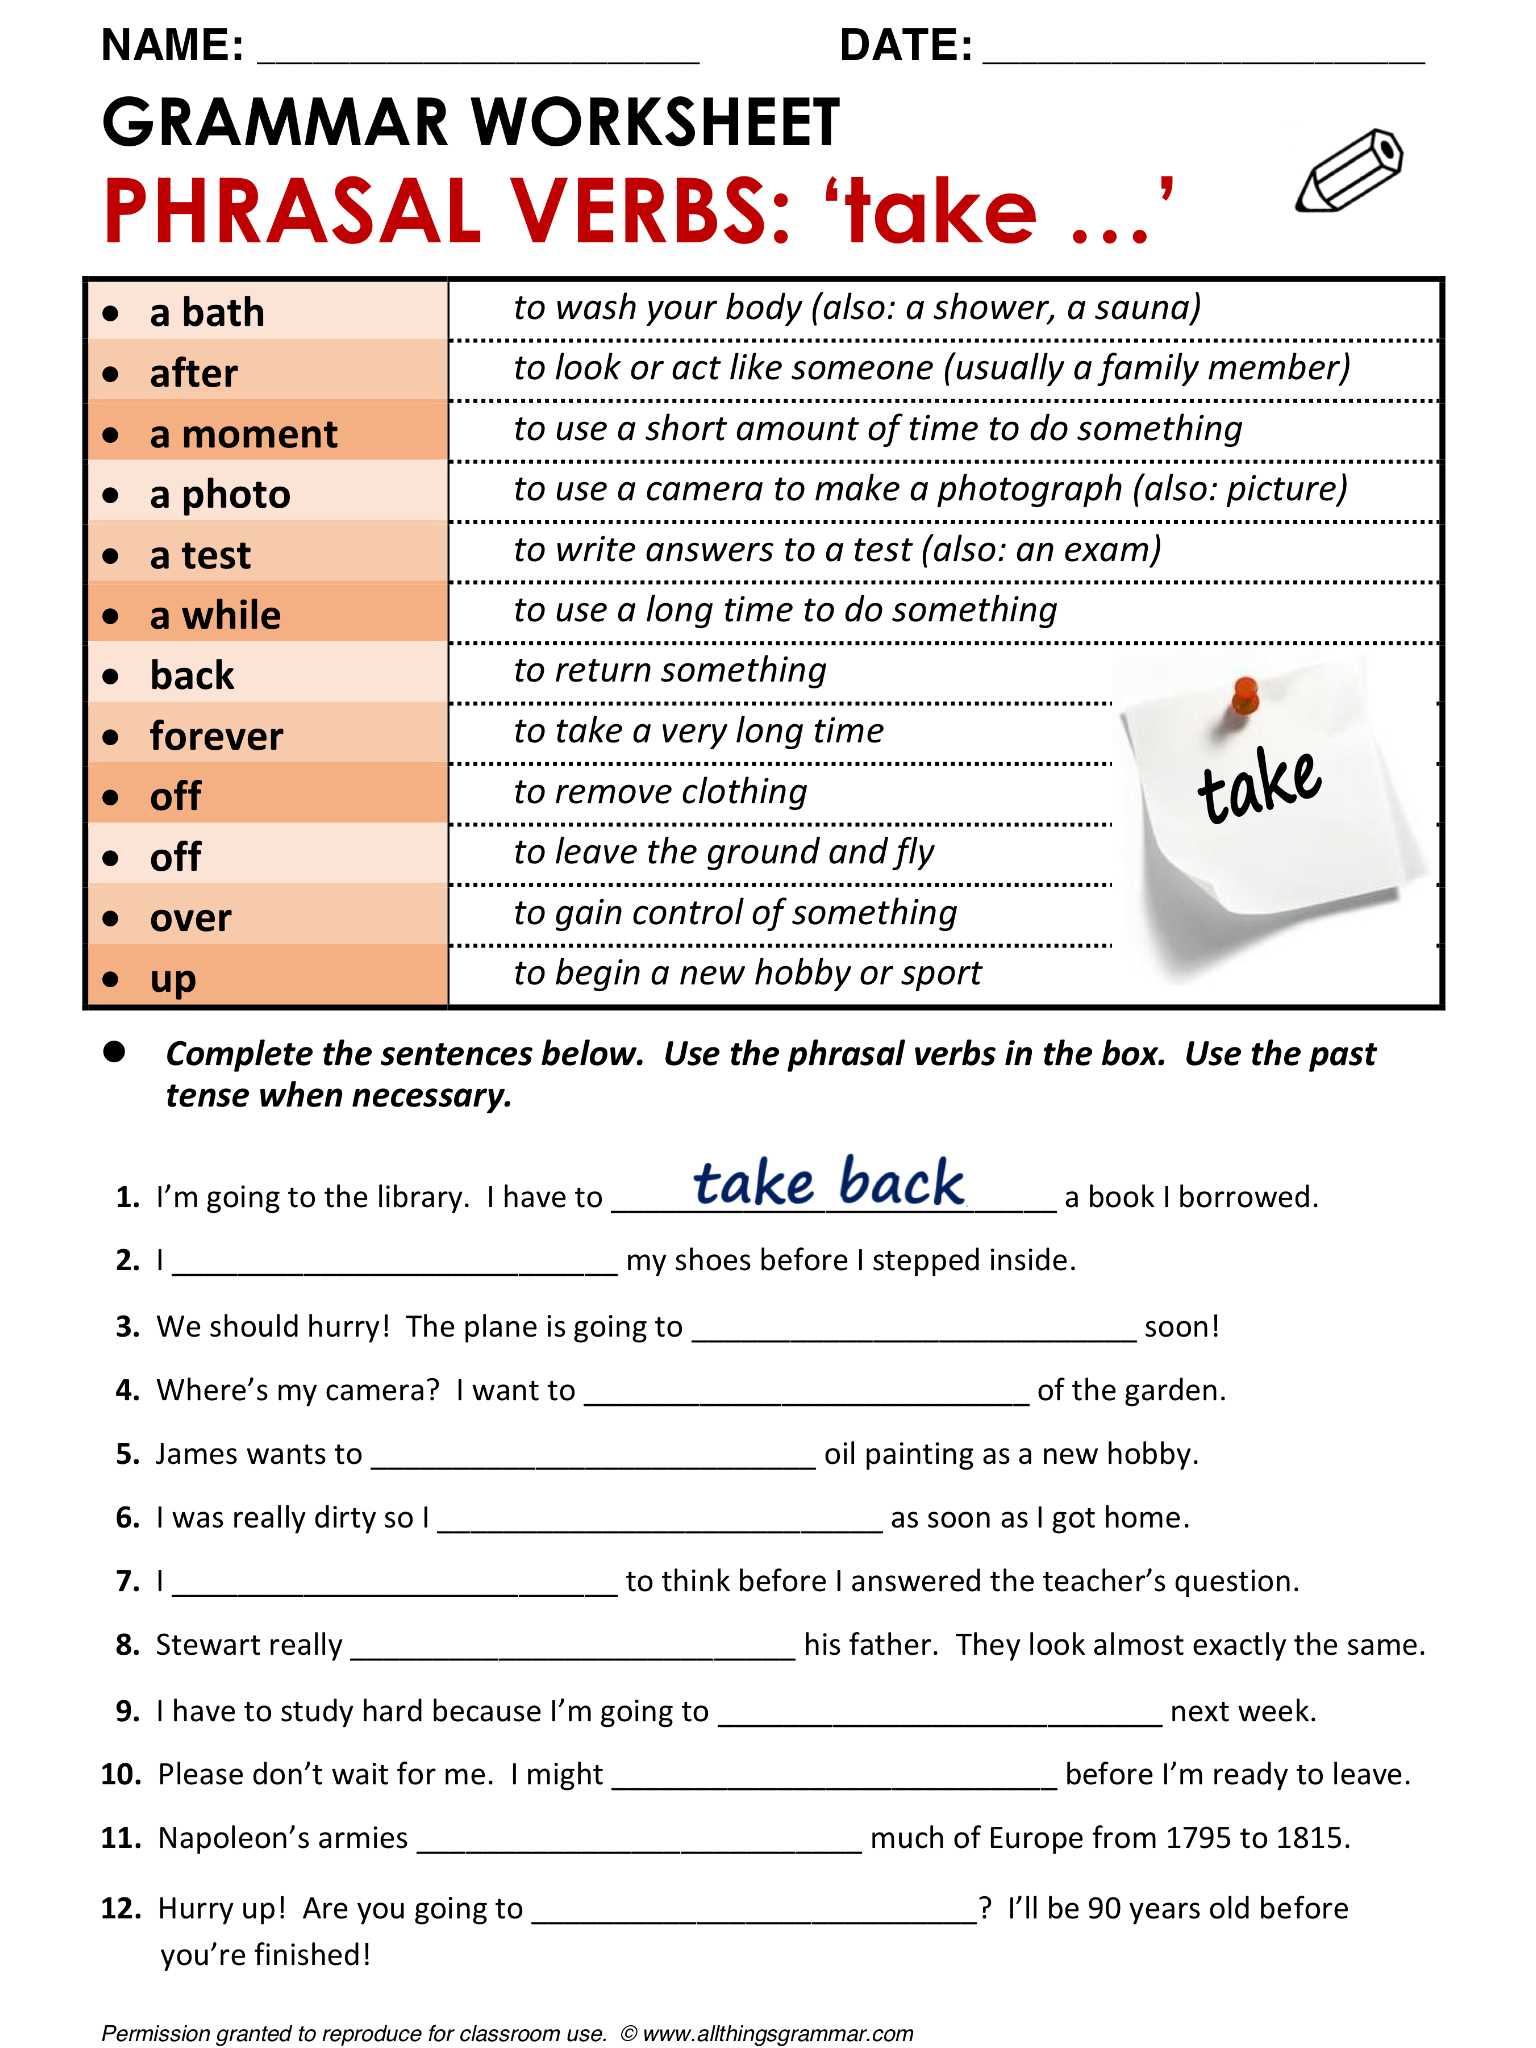 Probability Worksheets with Answers with Phrasal Verbs In English Phrasal Verbs Pinterest